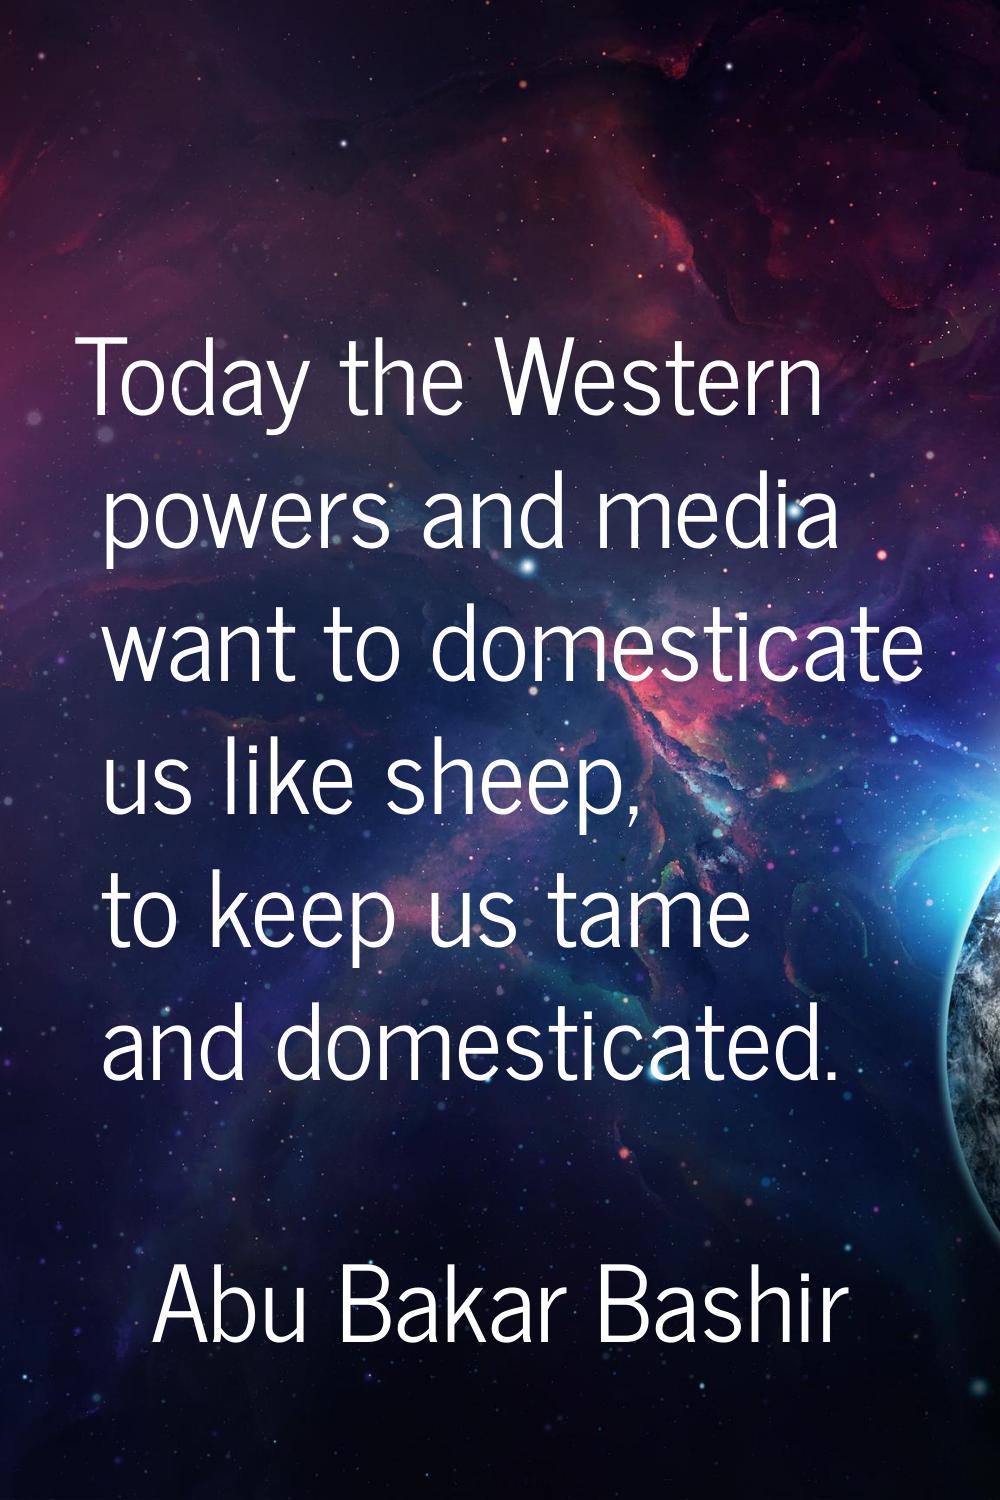 Today the Western powers and media want to domesticate us like sheep, to keep us tame and domestica